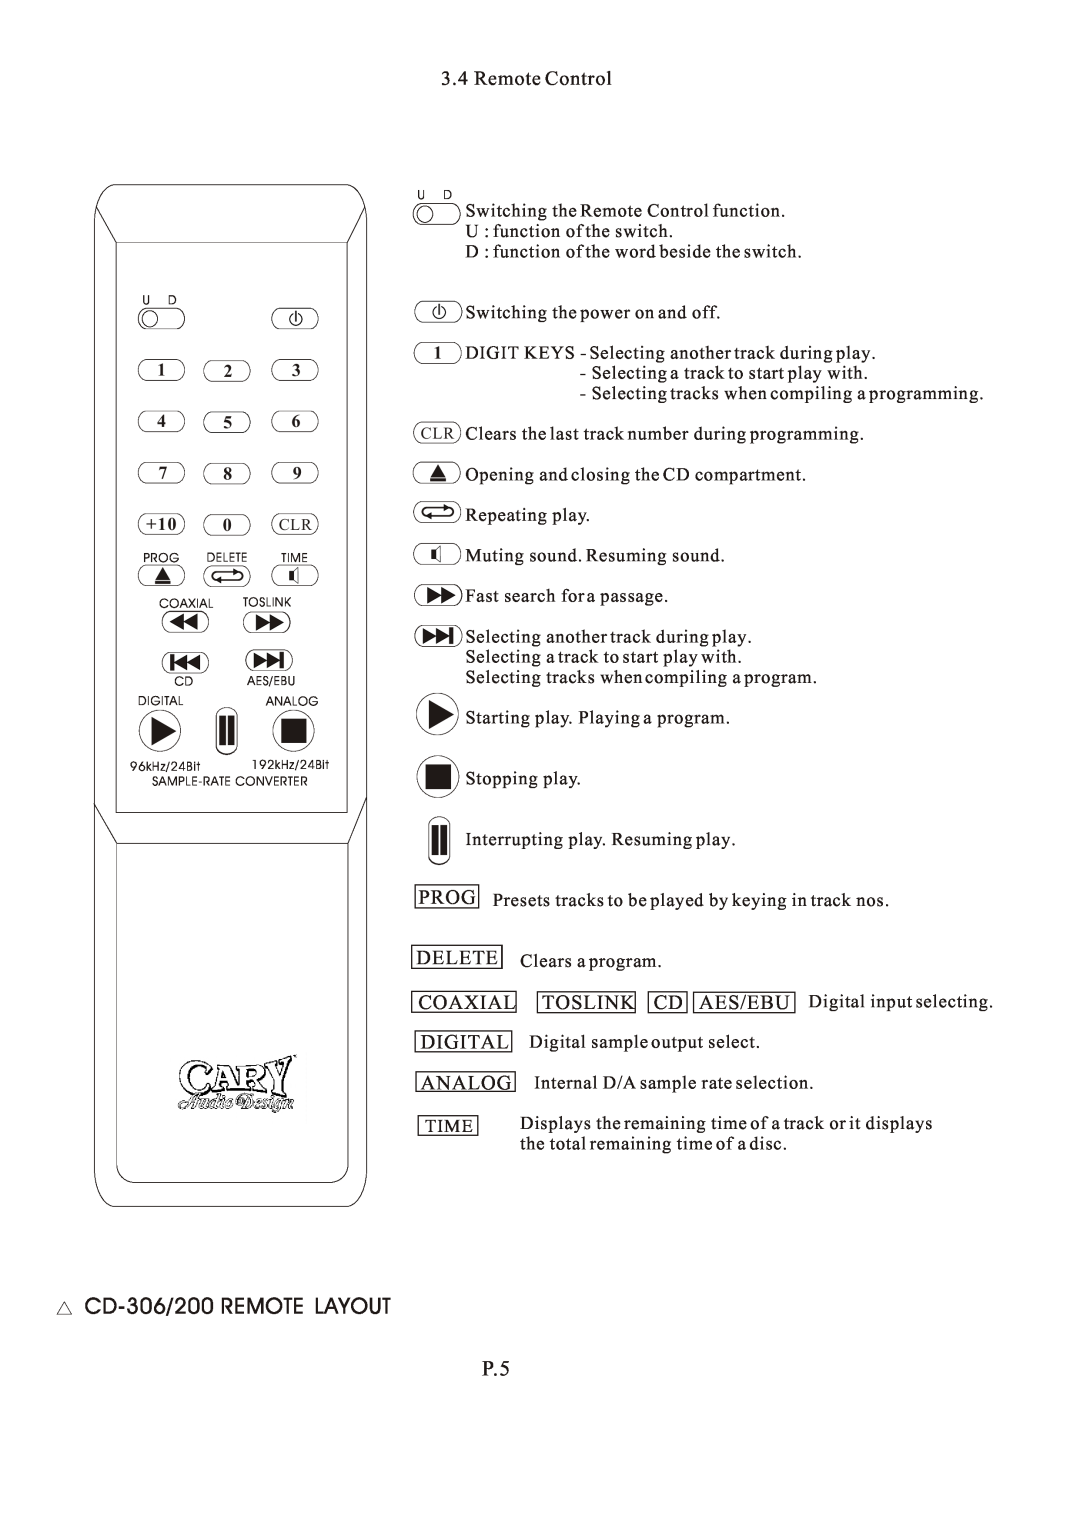 Cary Audio Design CD 200, CD 306 specifications CD-306/200REMOTE LAYOUT, Remote Control, Delete Coaxial Digital Analog, Time 